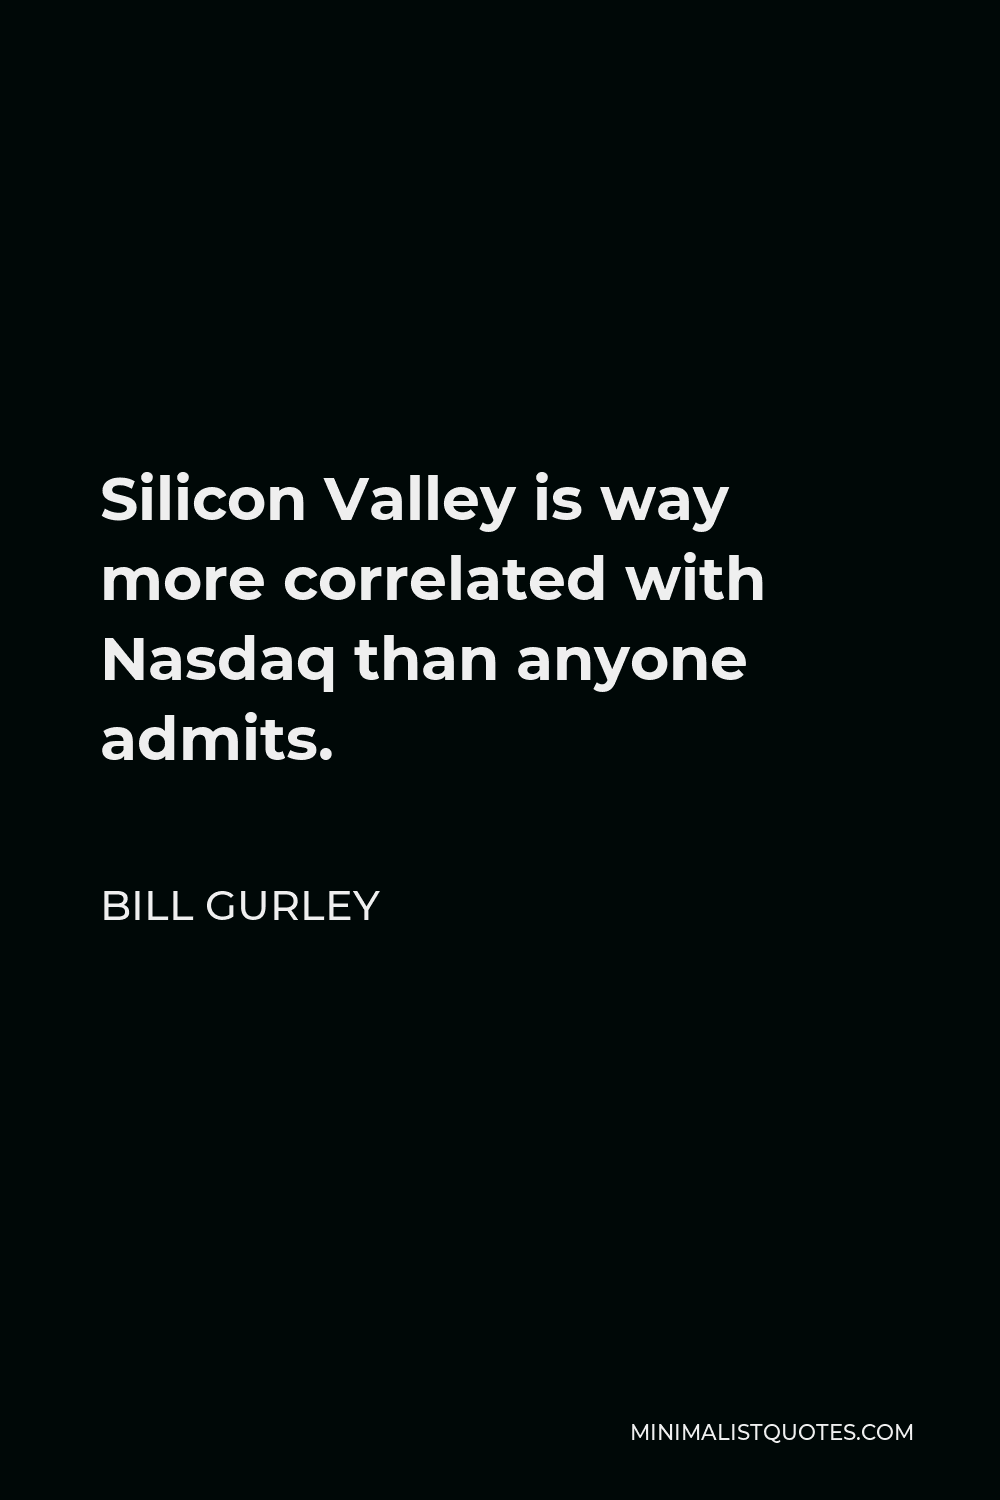 Bill Gurley Quote - Silicon Valley is way more correlated with Nasdaq than anyone admits.